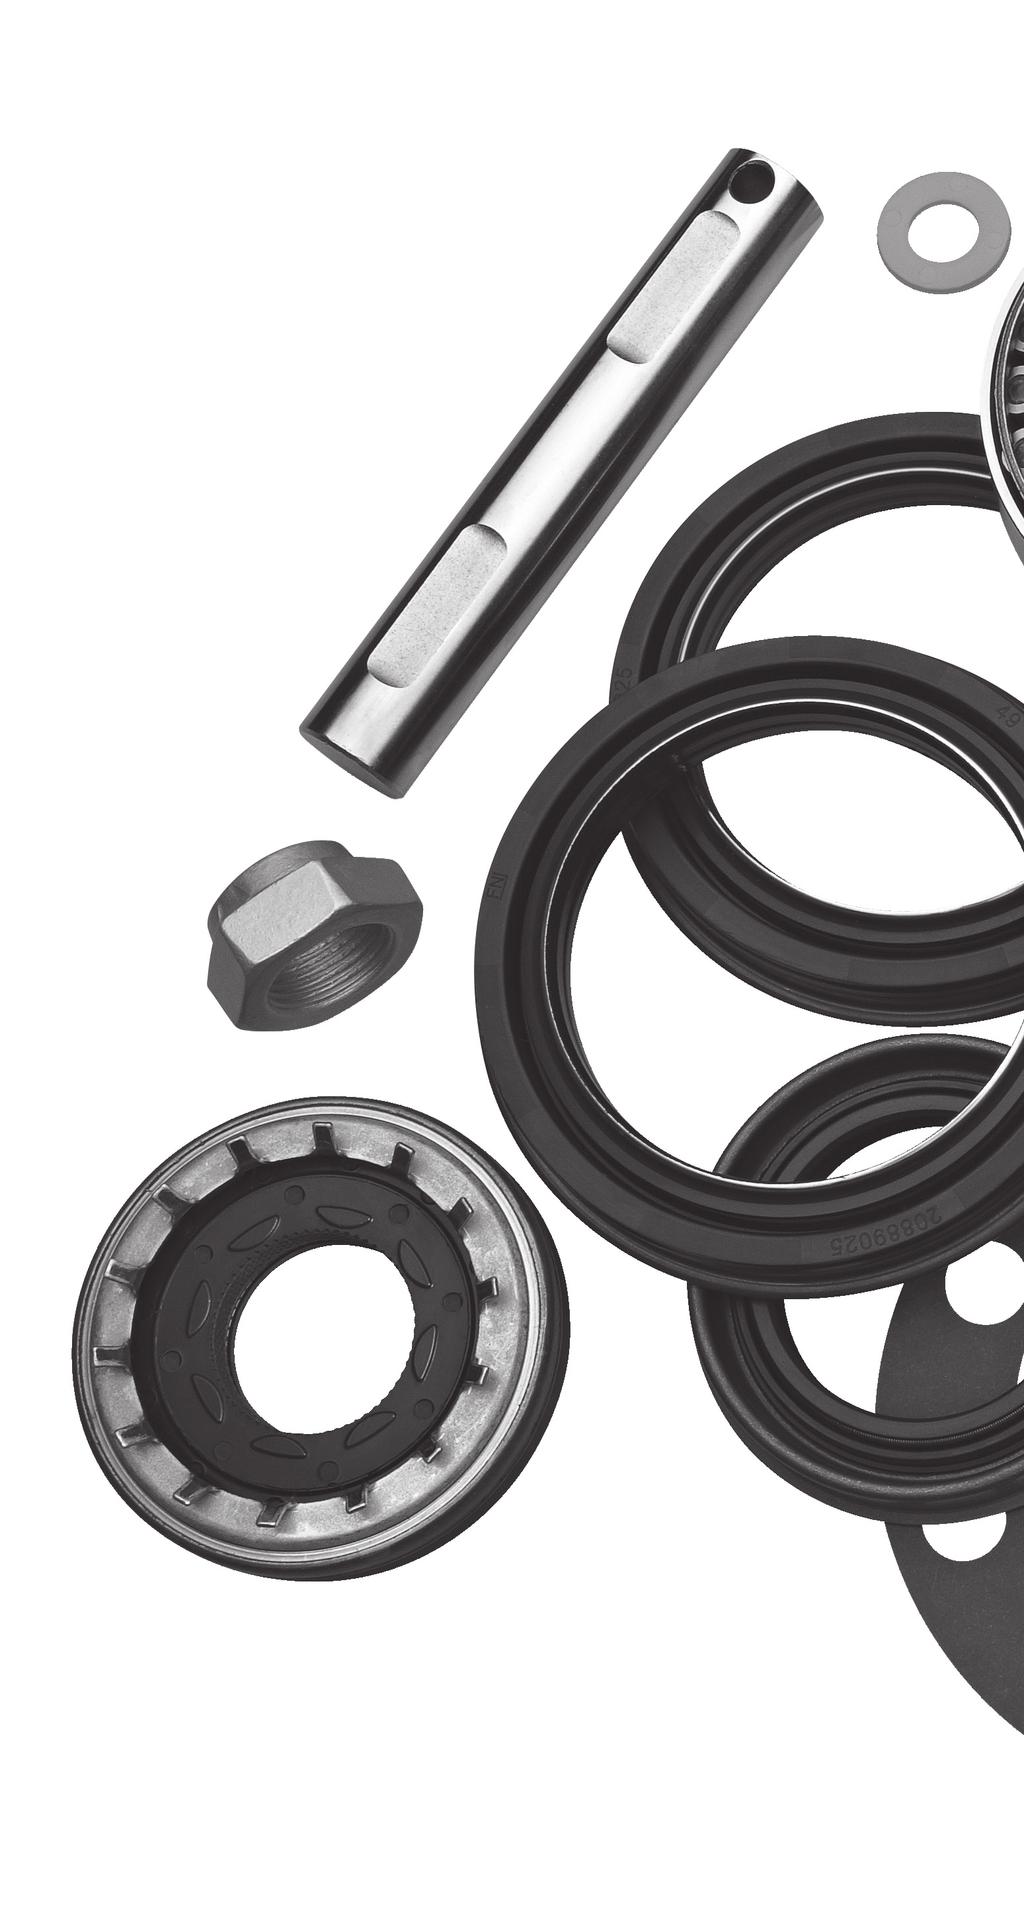 Axle Components Driveshaft Components Repair Kits Only original equipment quality components are guaranteed to meet the same specifications as the